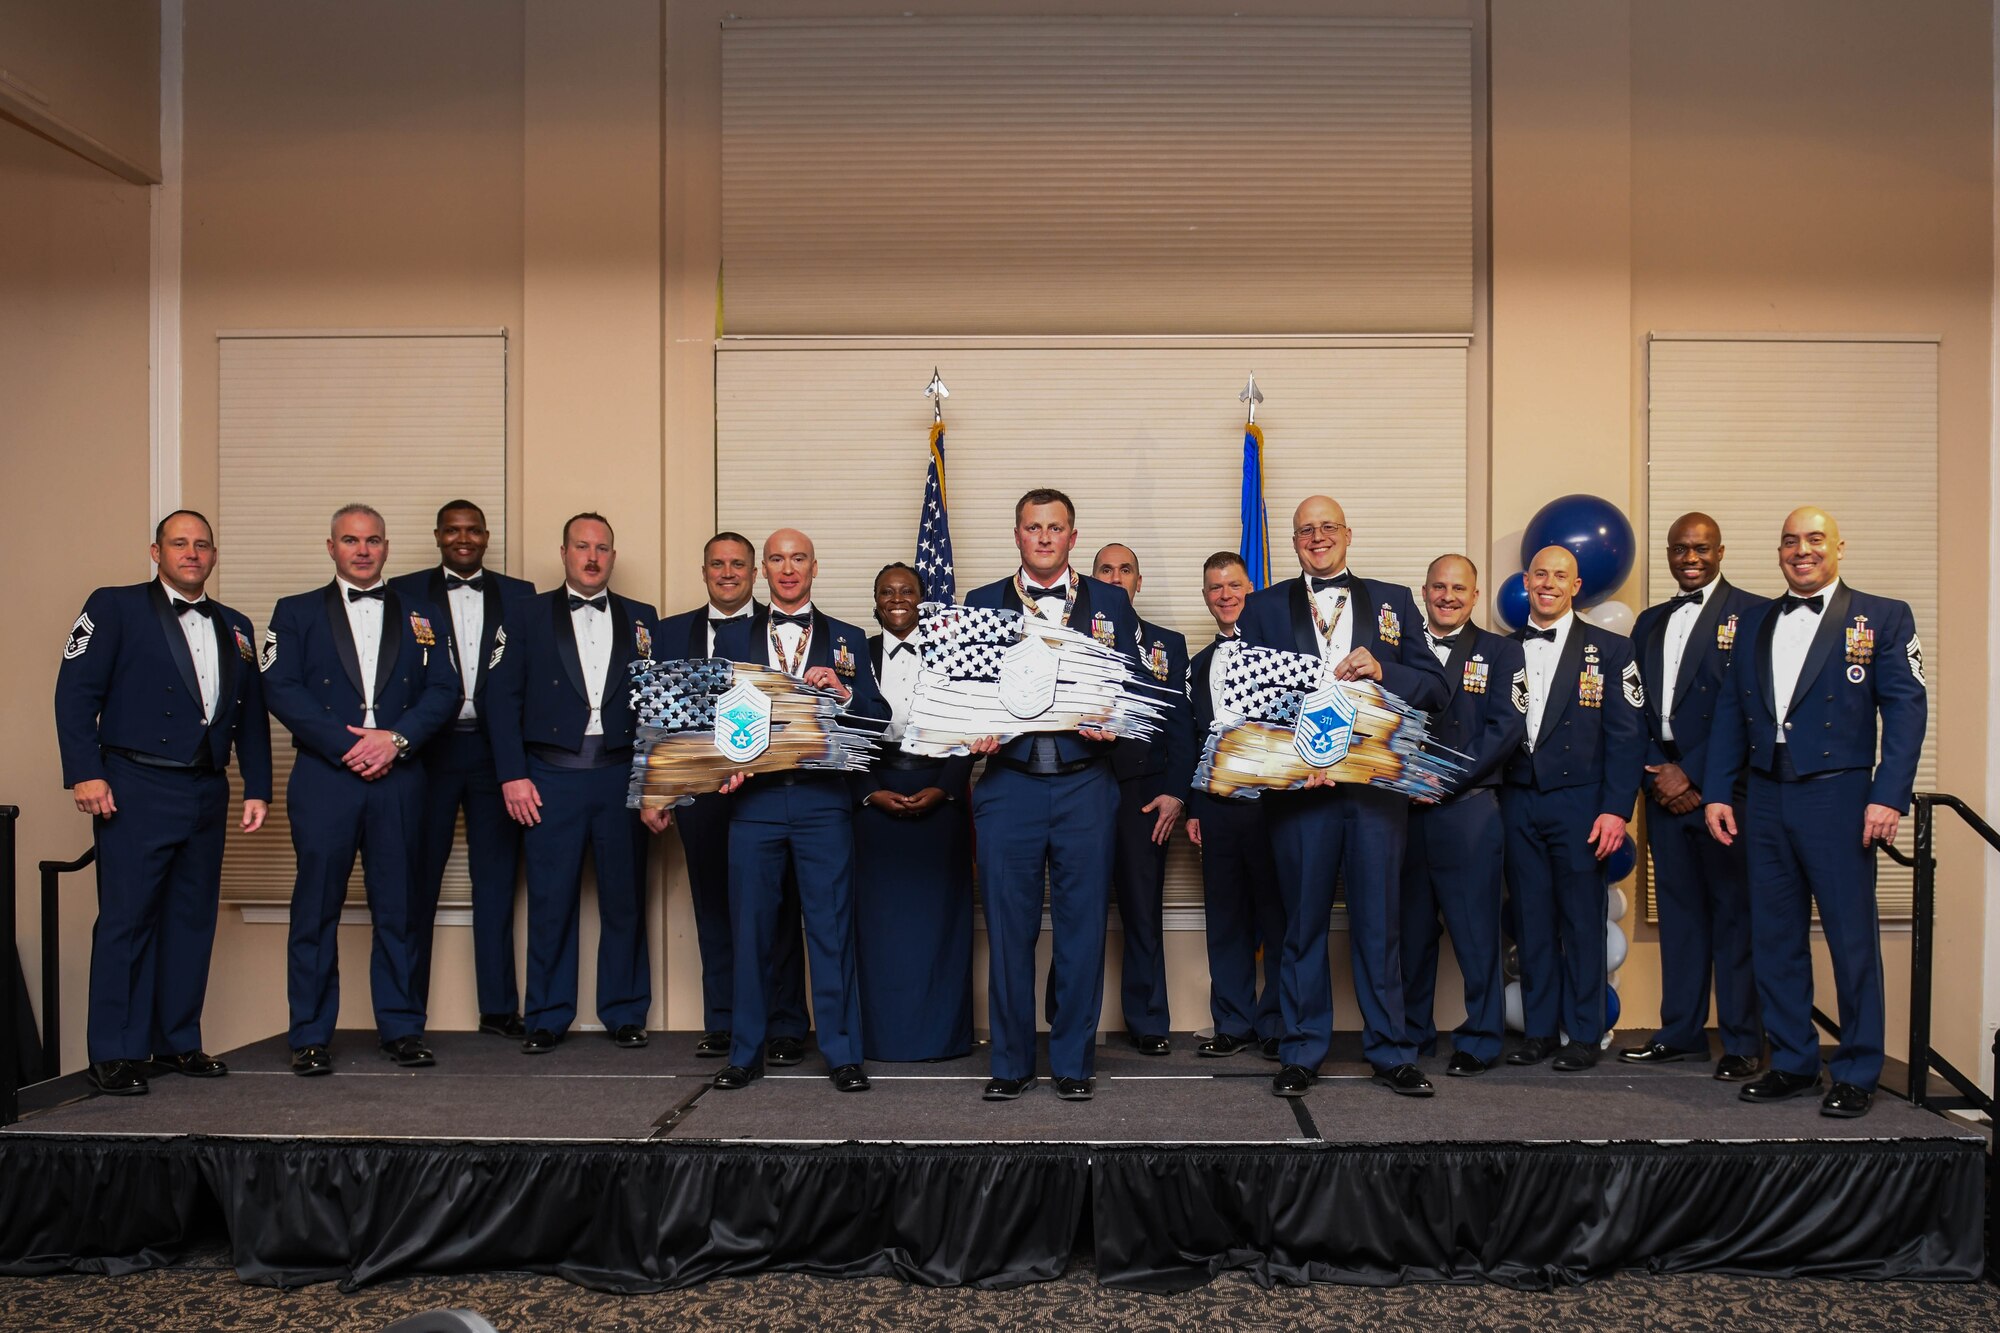 U.S. Air Force chief master sergeants pose for a group photo with recognition plaques during the chief master sergeant recognition ceremony at Seymour Johnson Air Force Base, North Carolina, March 2, 2024. These current and recently selected leaders were recognized as part of the one percent of service members who hold the rank of chief master sergeant. (U.S. Air Force photo by Senior Airman Taylor Hunter)